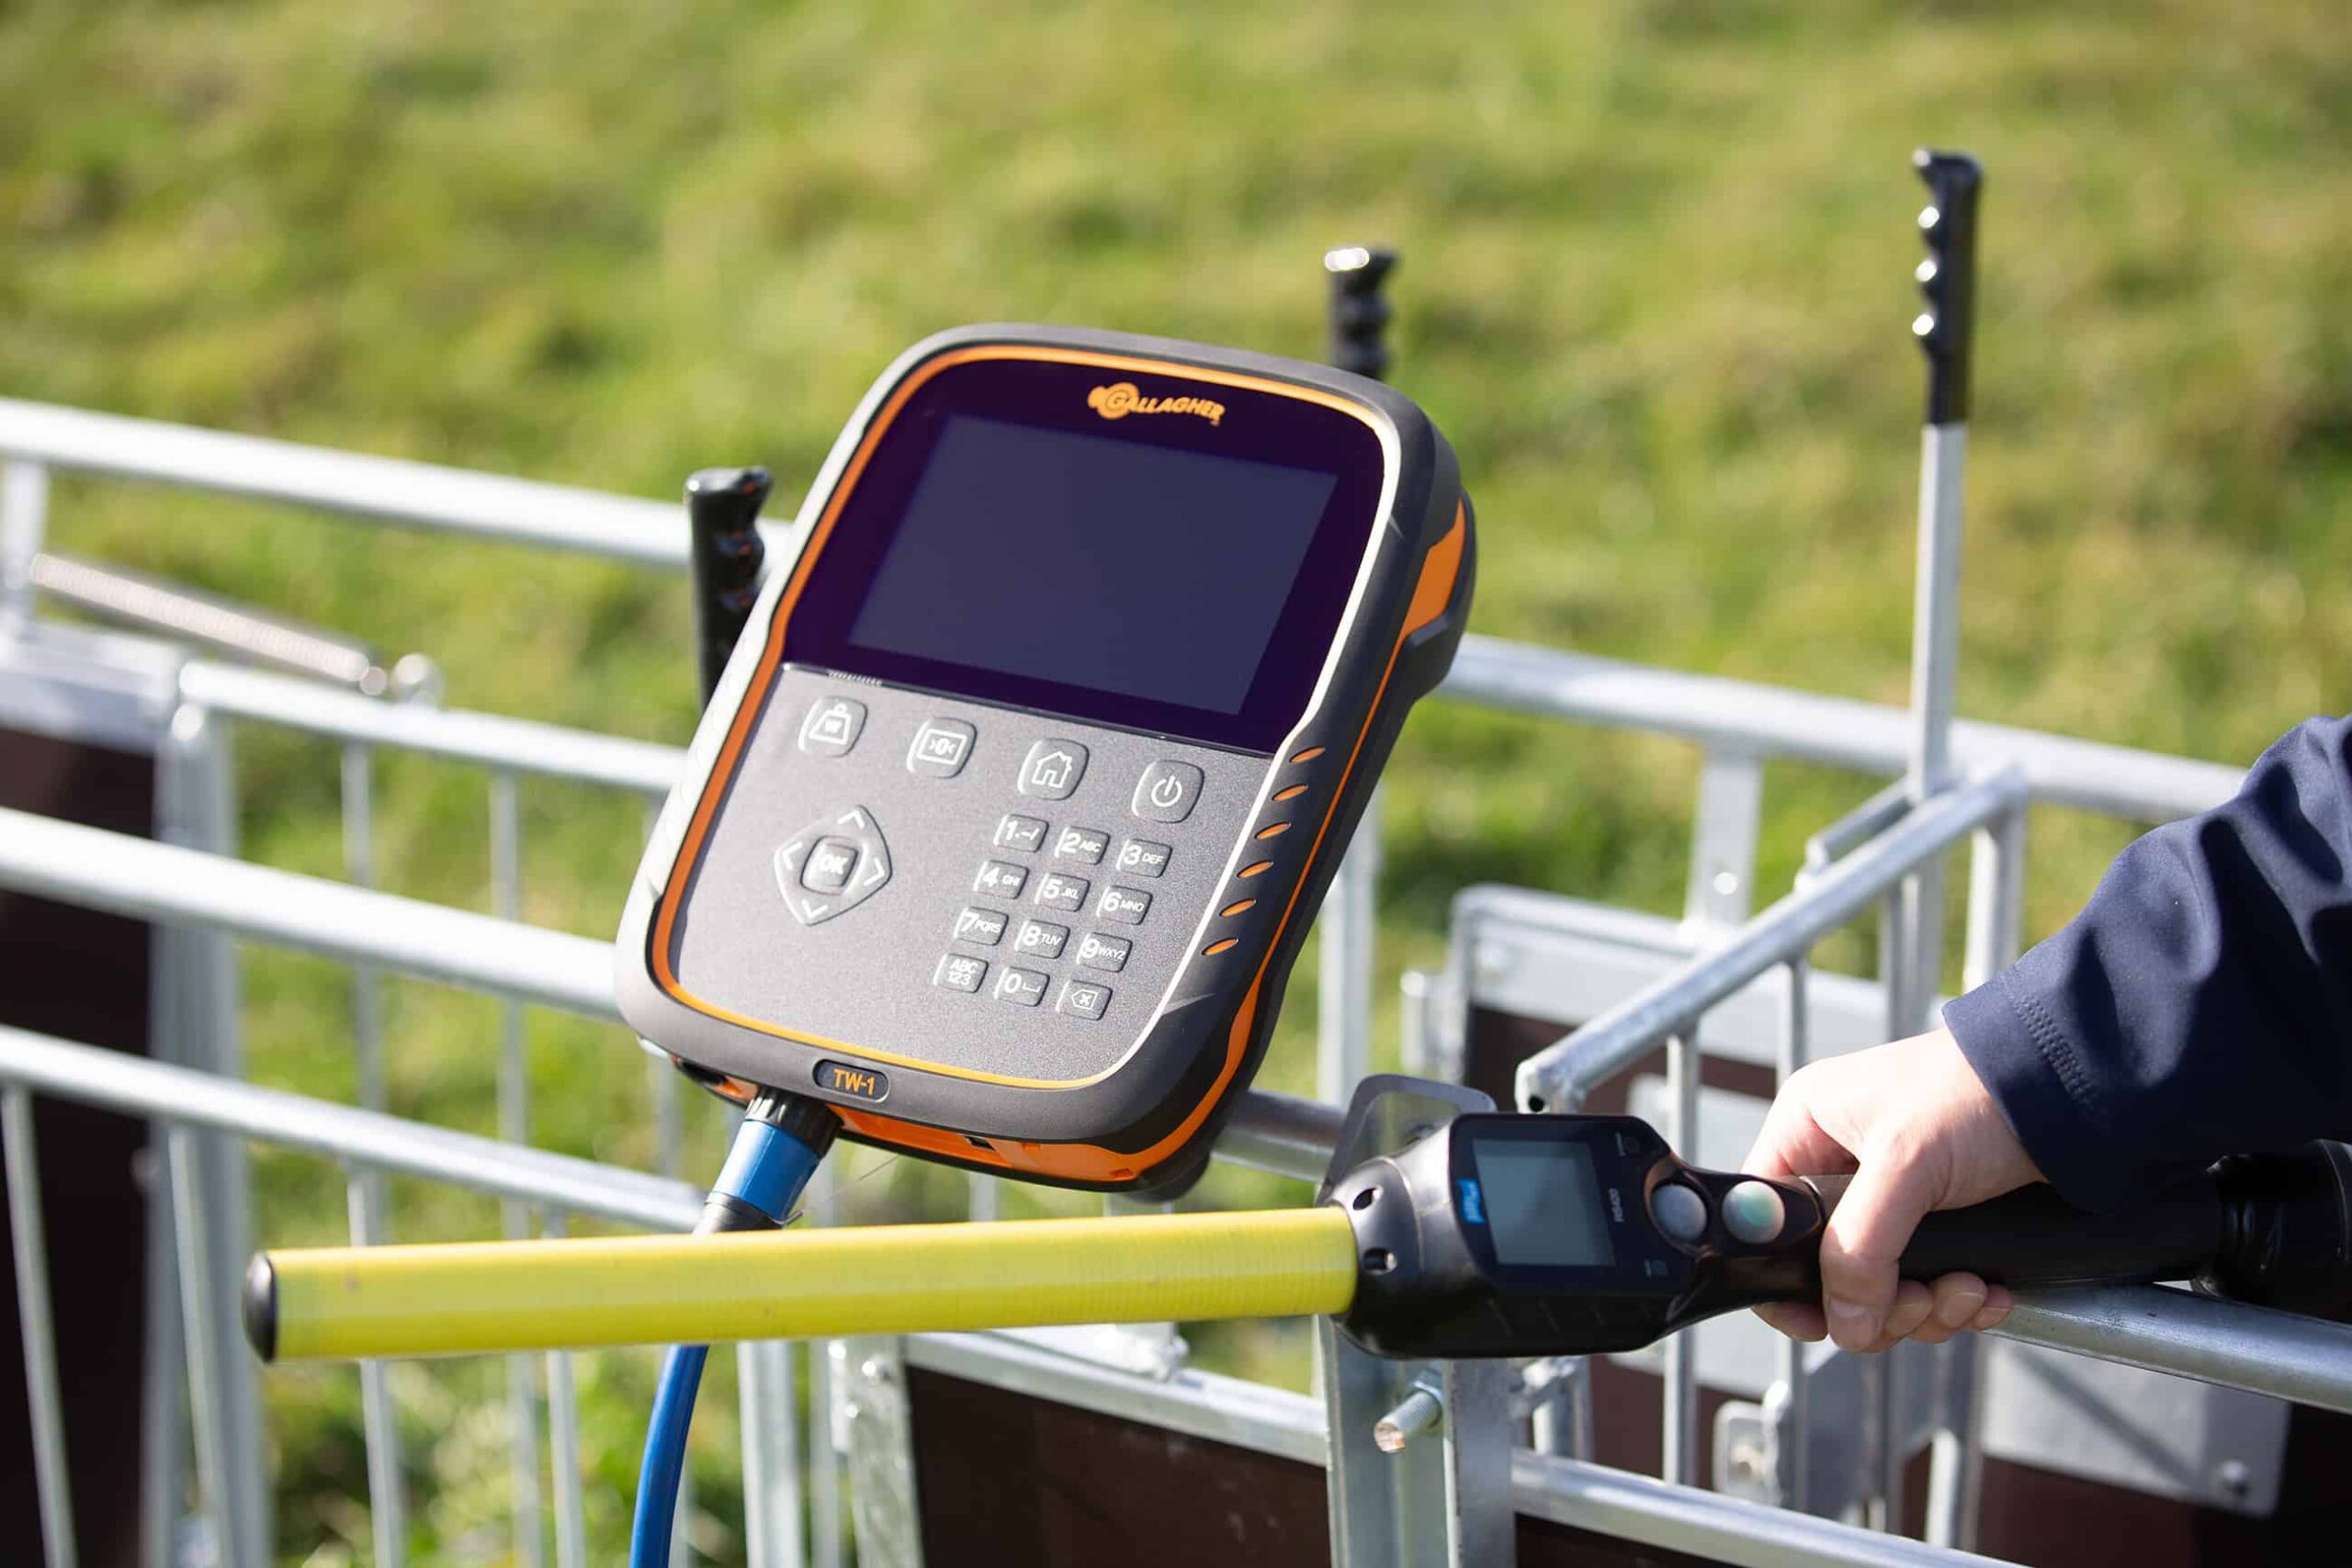 Exclusive agreement to distribute Gallagher data collection and weighing systems